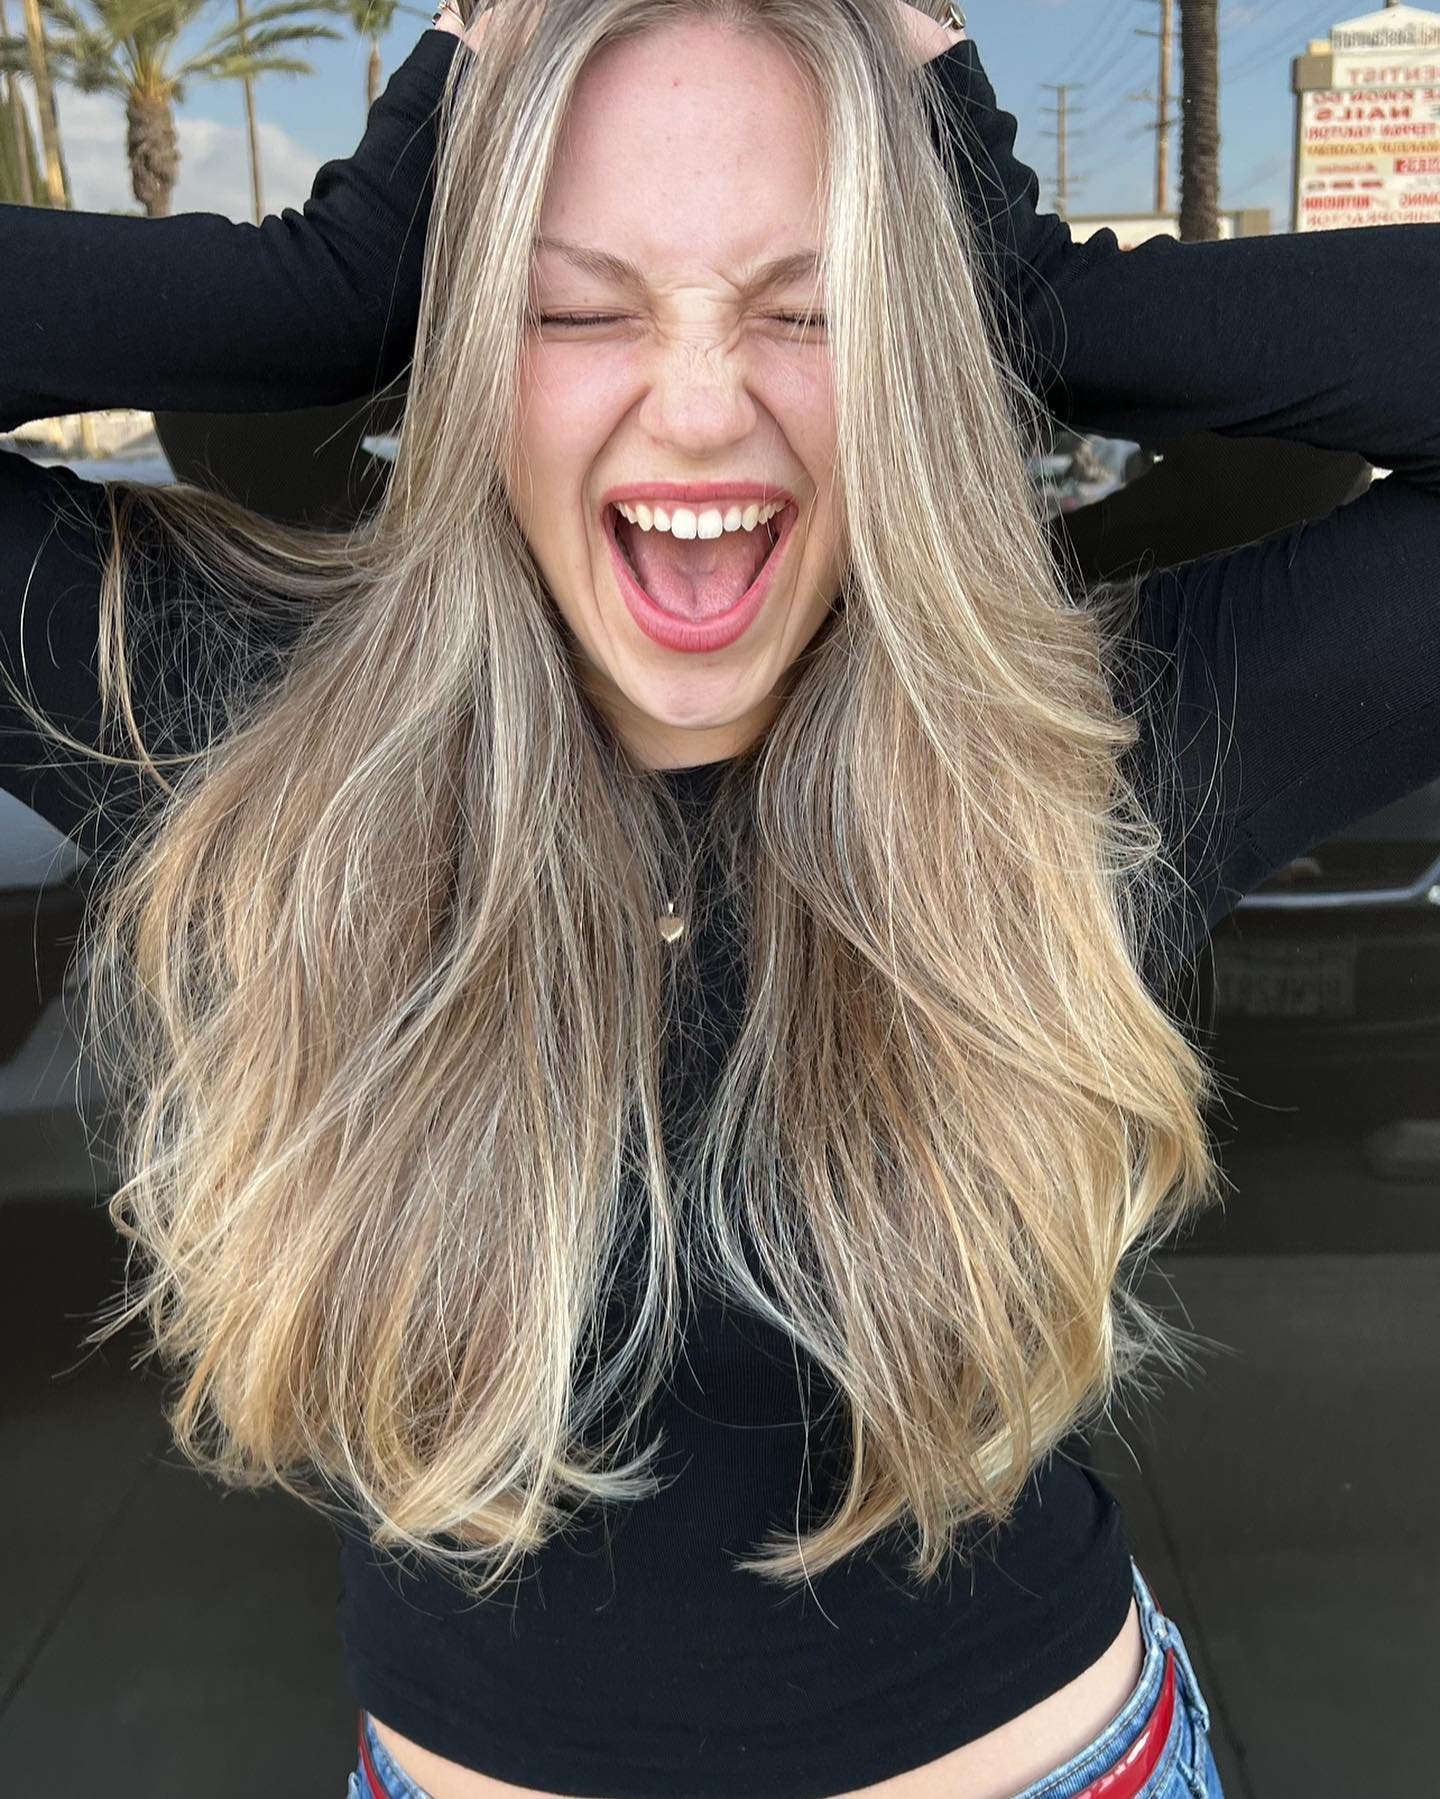 That feeling when you go blonde for the first time! @jayneturnerr